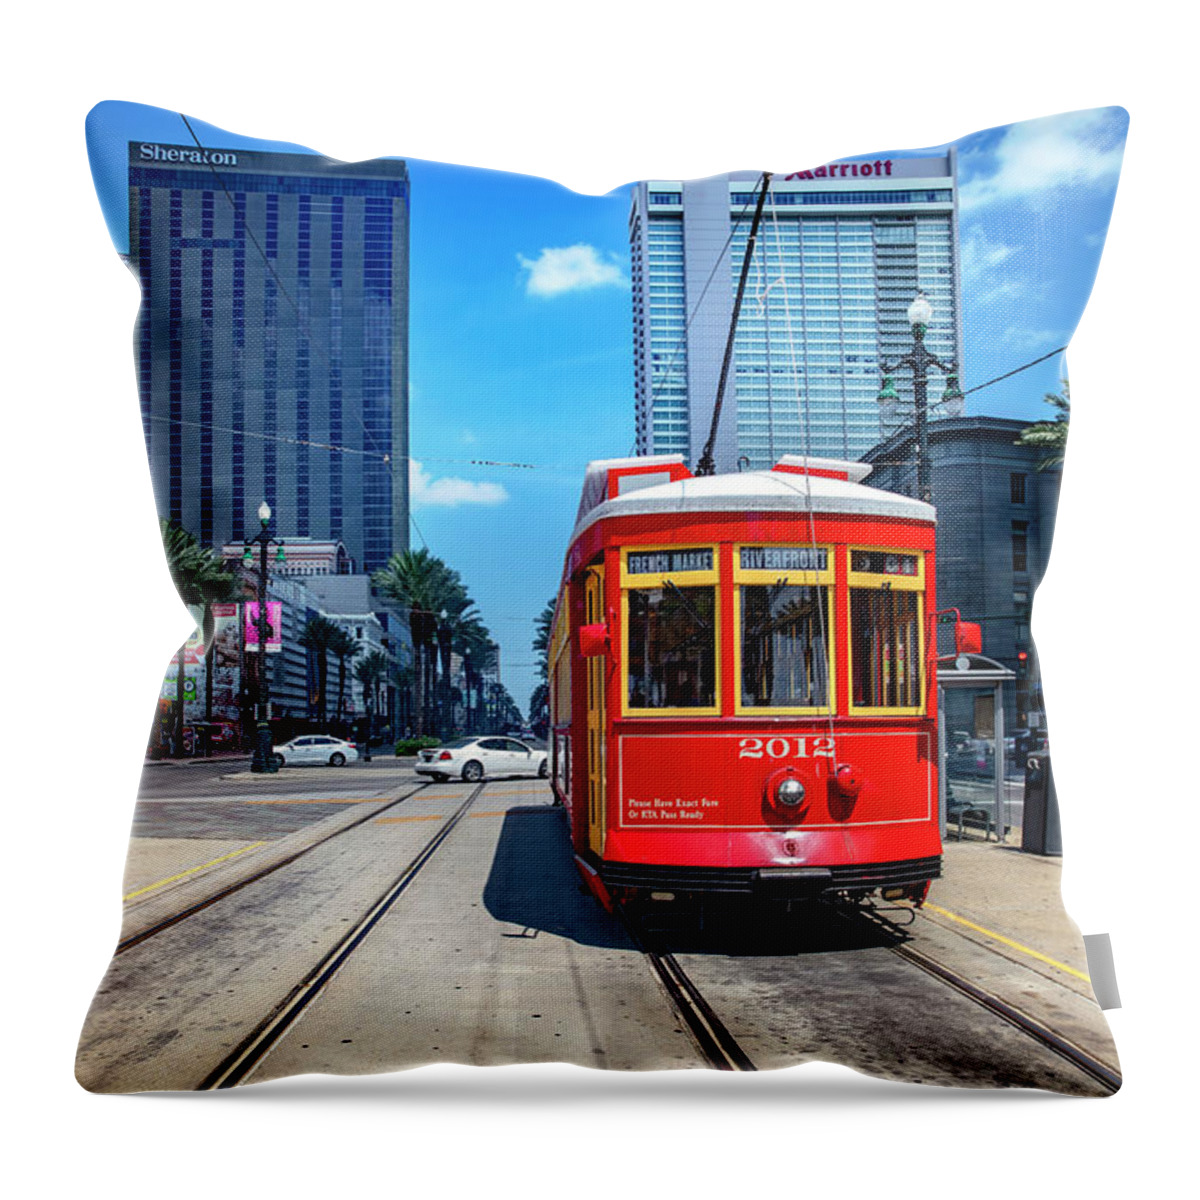 Estock Throw Pillow featuring the digital art Tram On Canal St, New Orleans La by Claudia Uripos